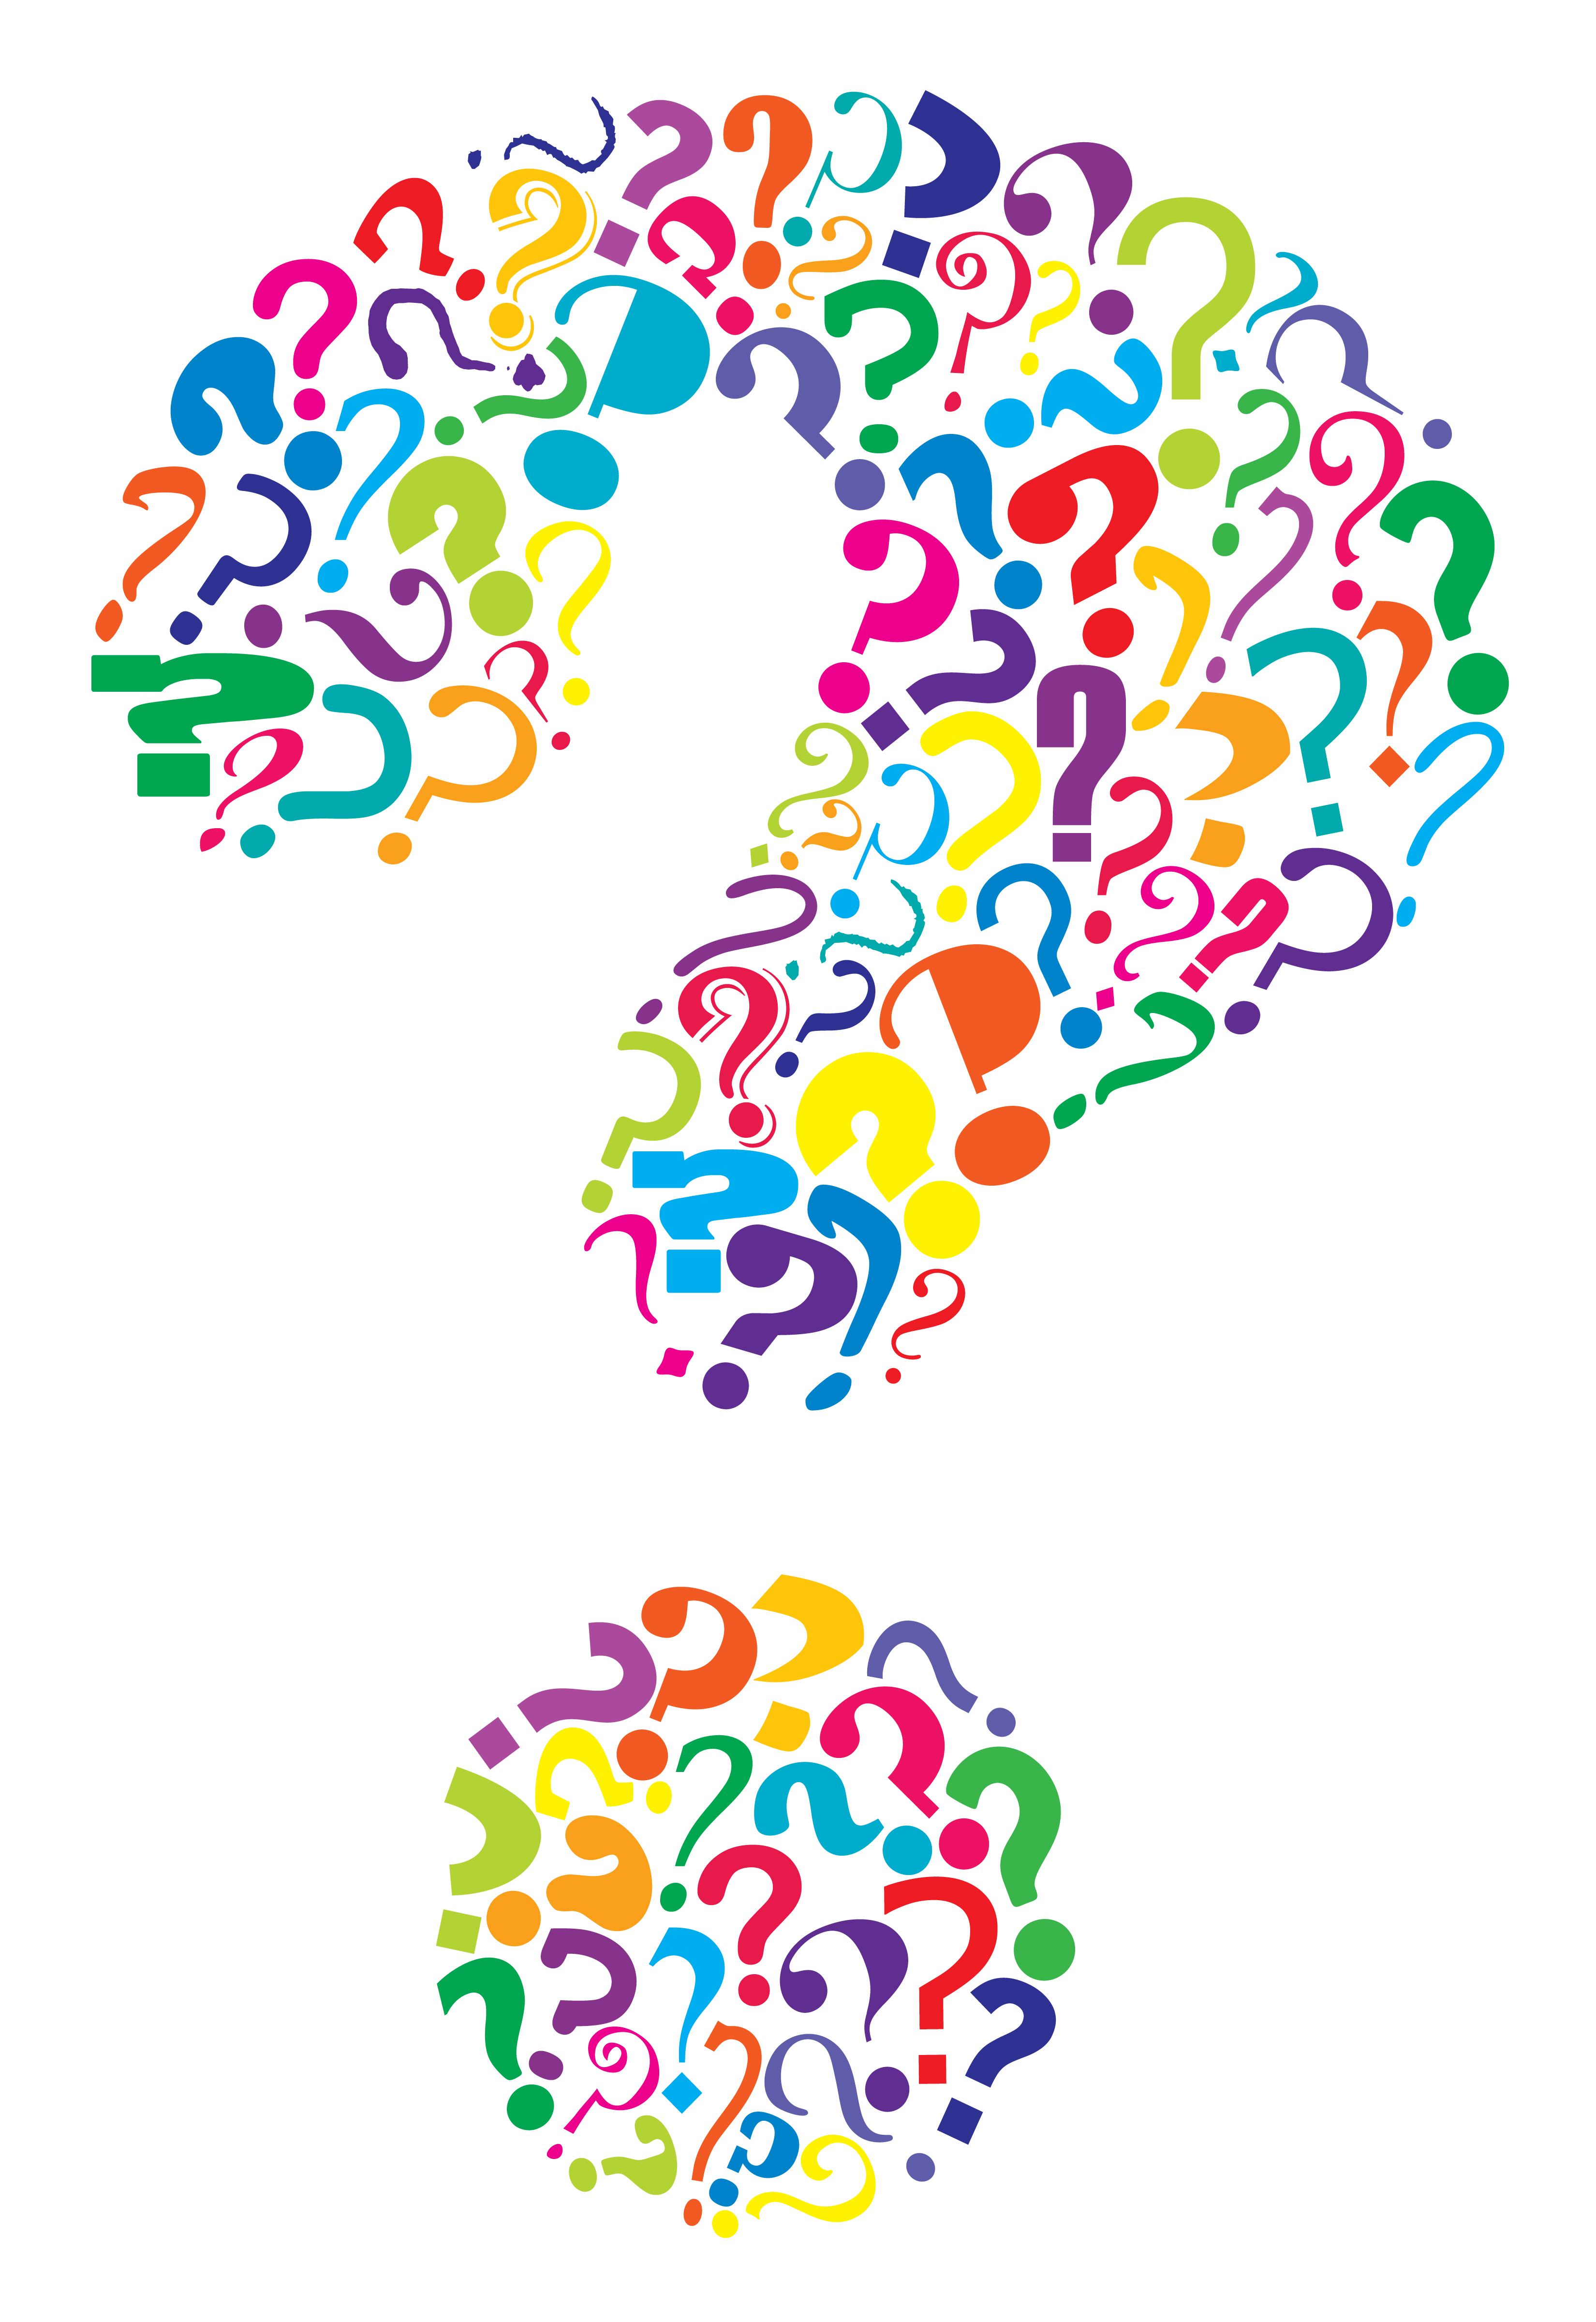 Free QUESTION MARKS, Download Free QUESTION MARKS png images, Free